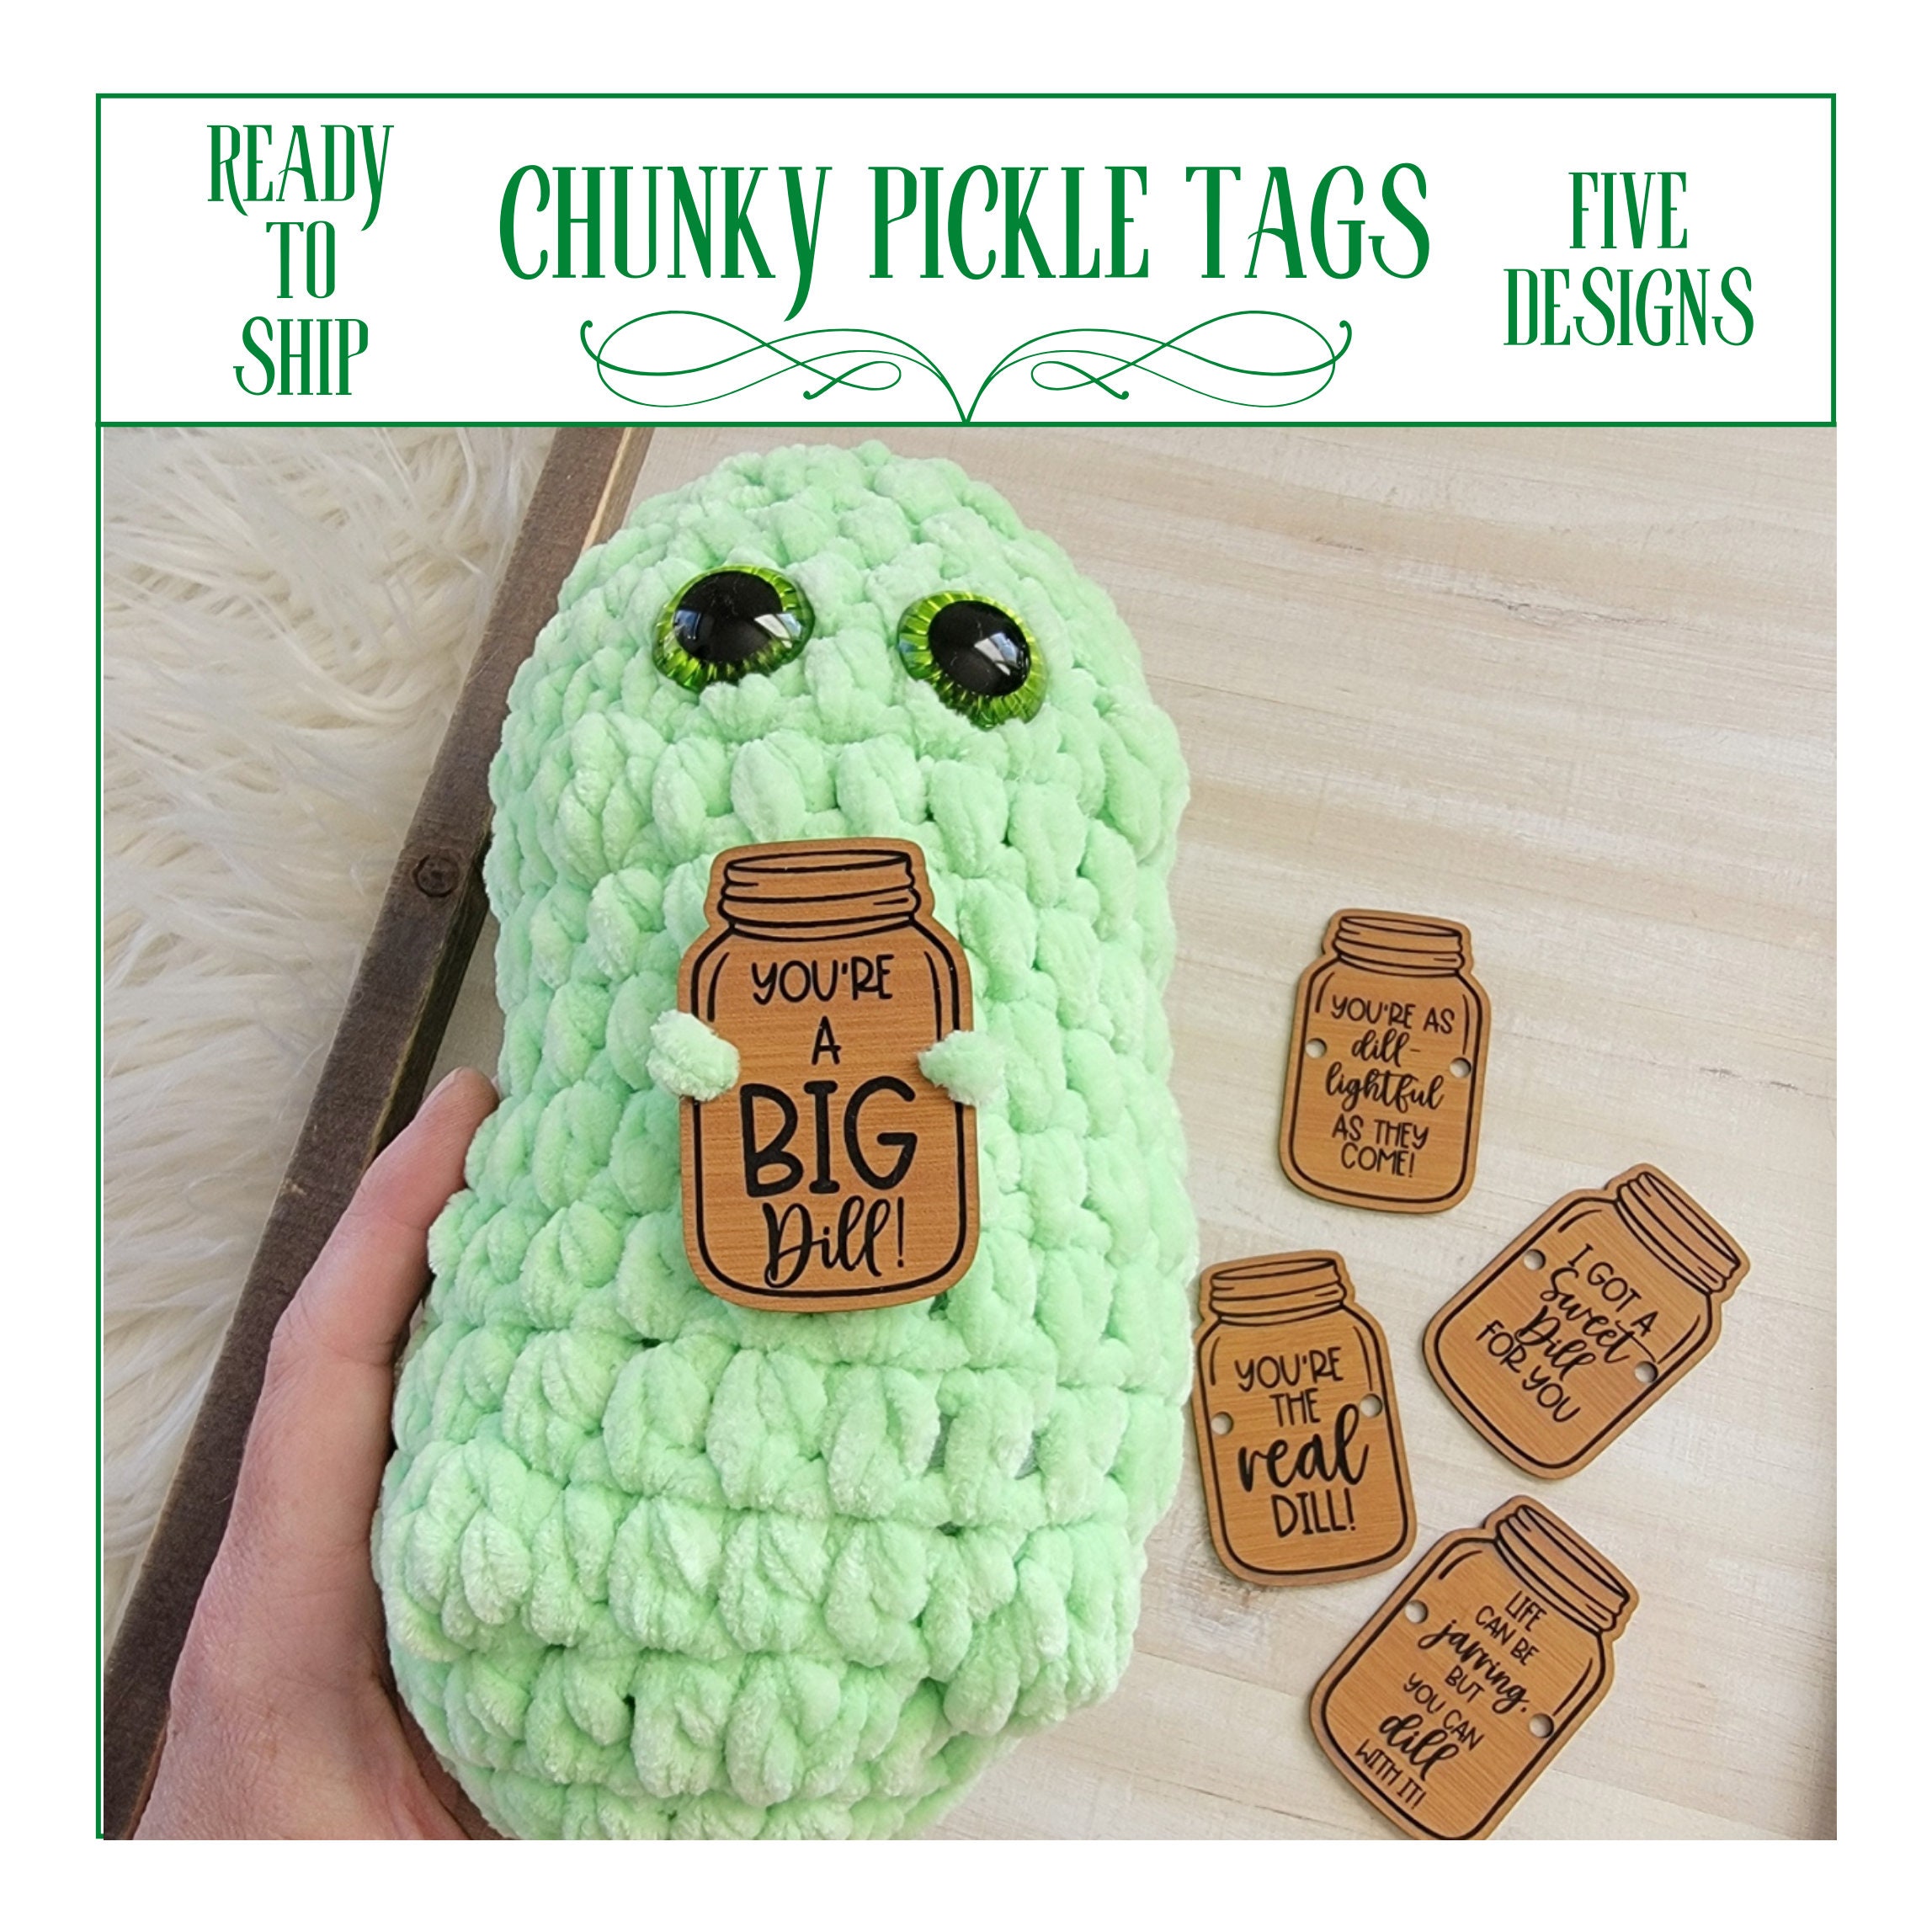 Chunky Pickle Tags~Crochet Amigurumi Emotional Support Pickle Tags